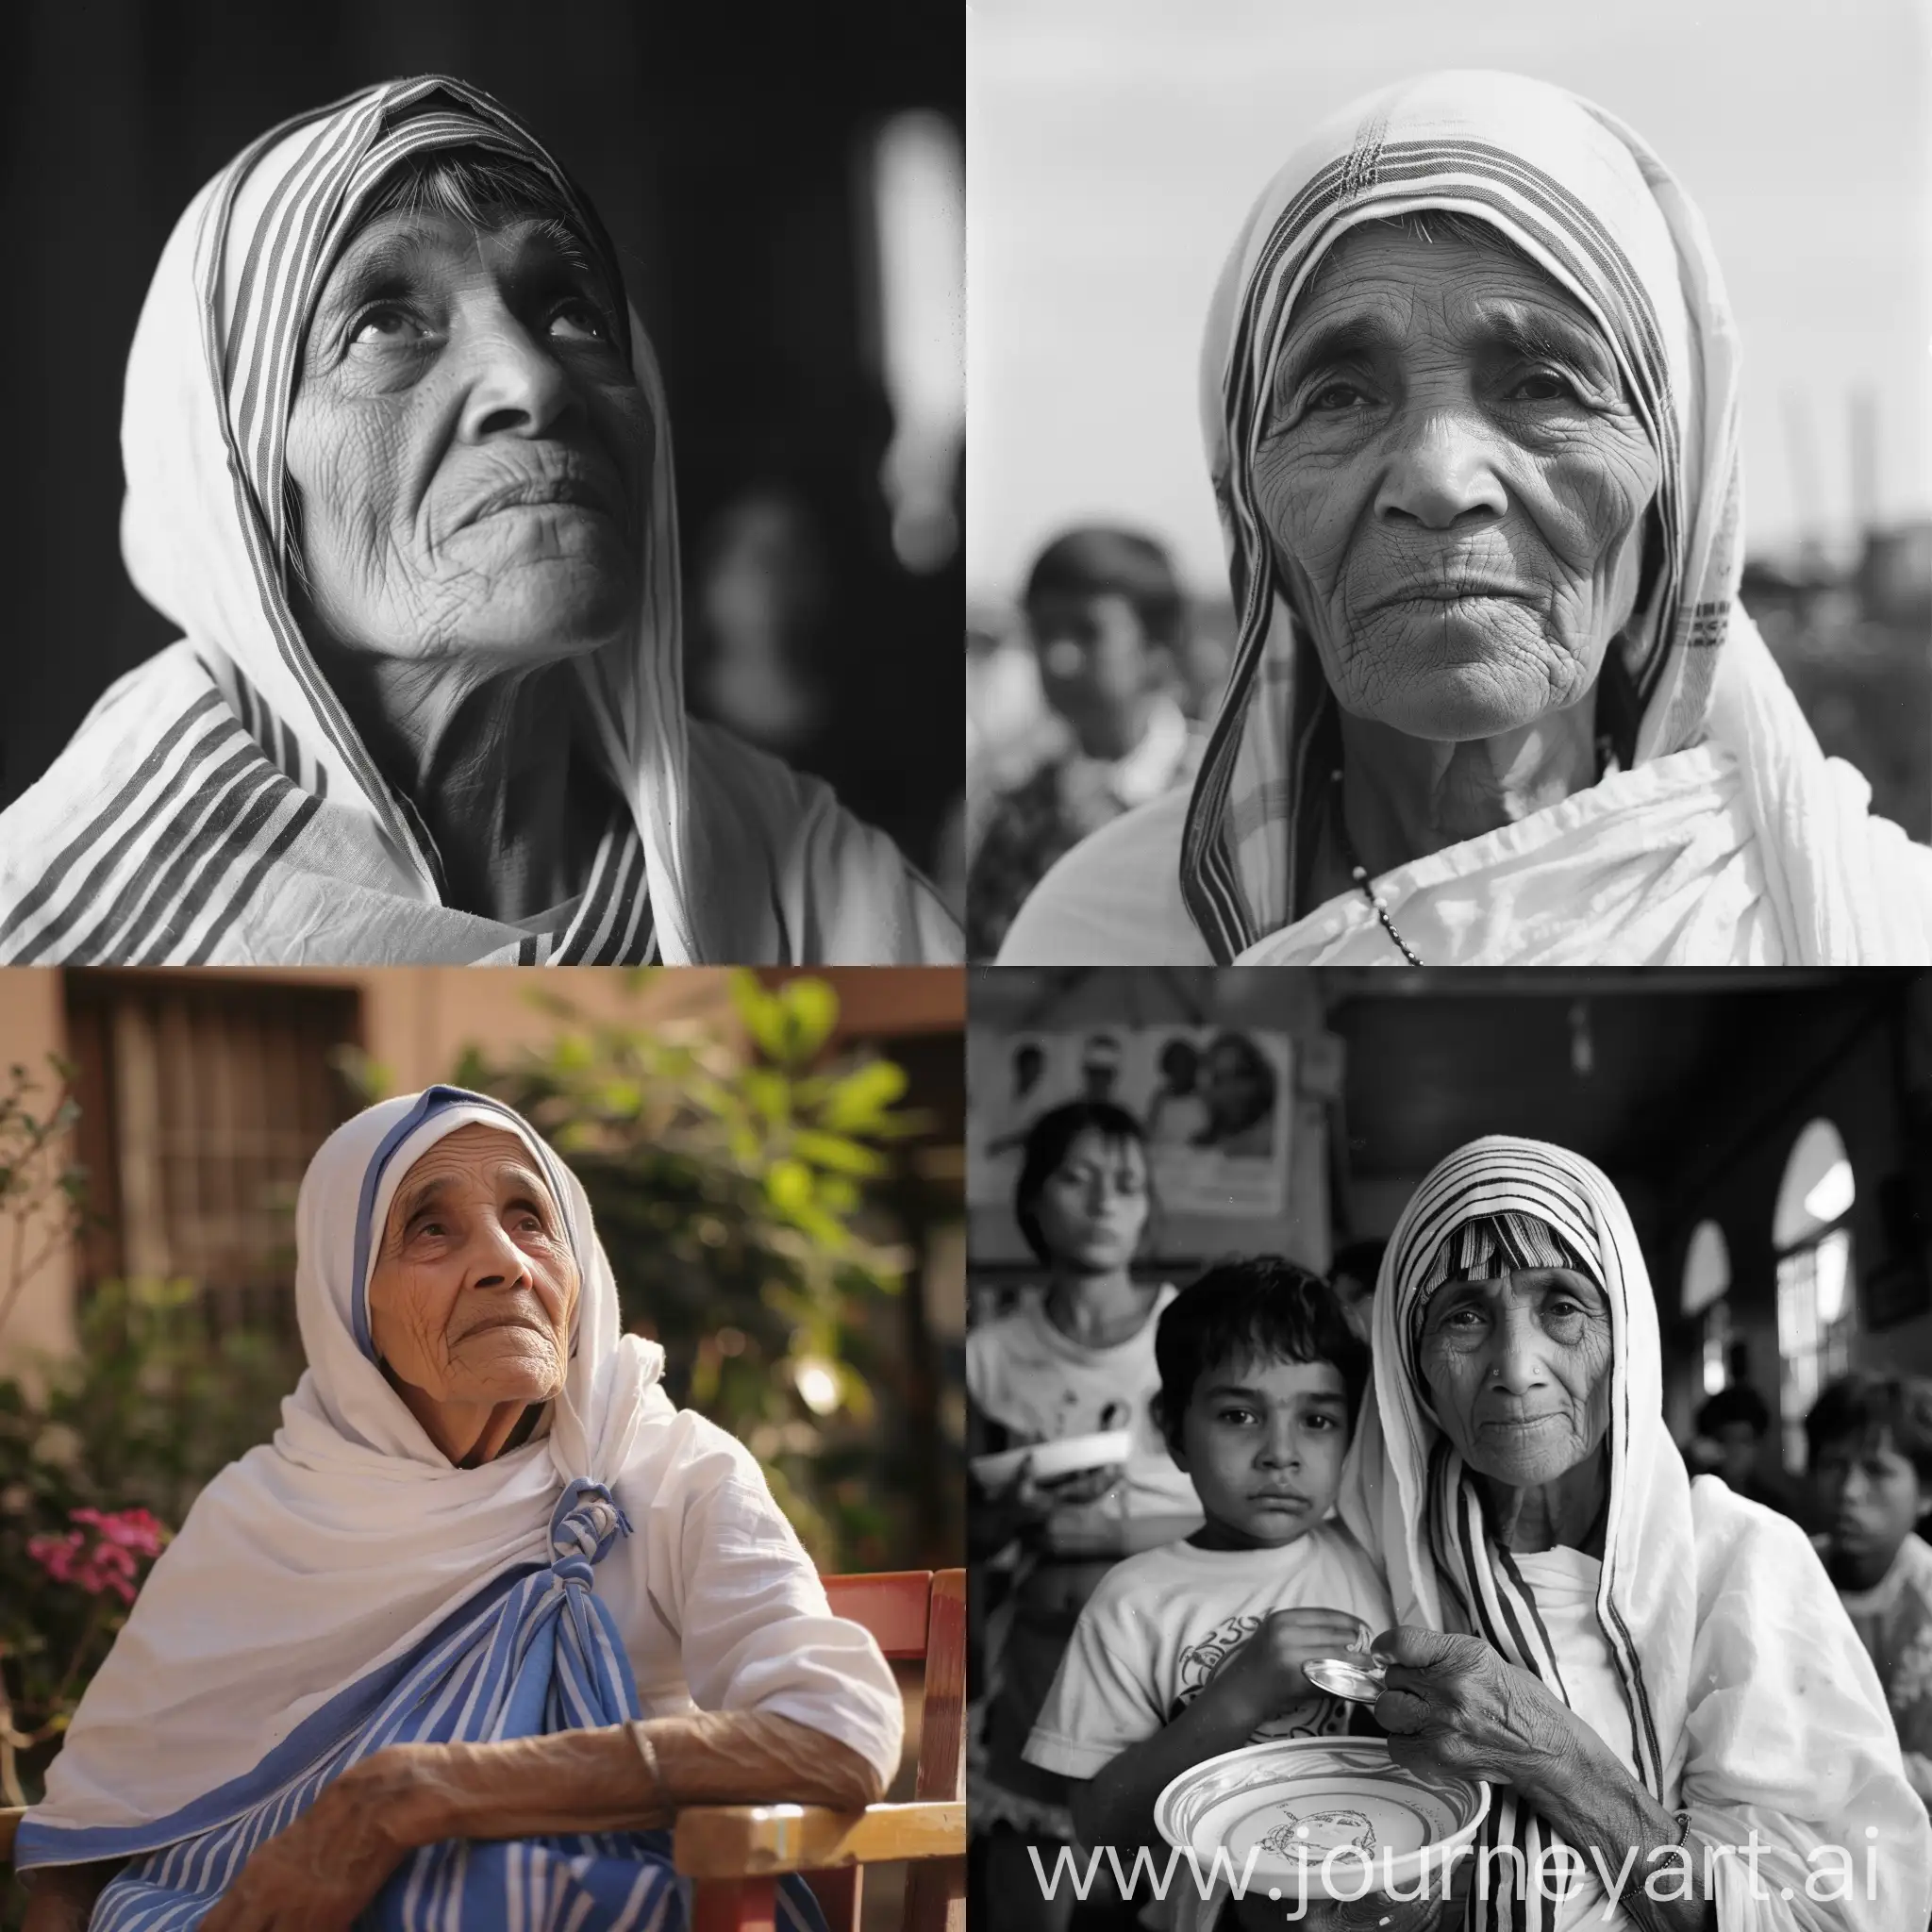 Mother-Teresa-Combatting-Poverty-Through-Compassionate-Action